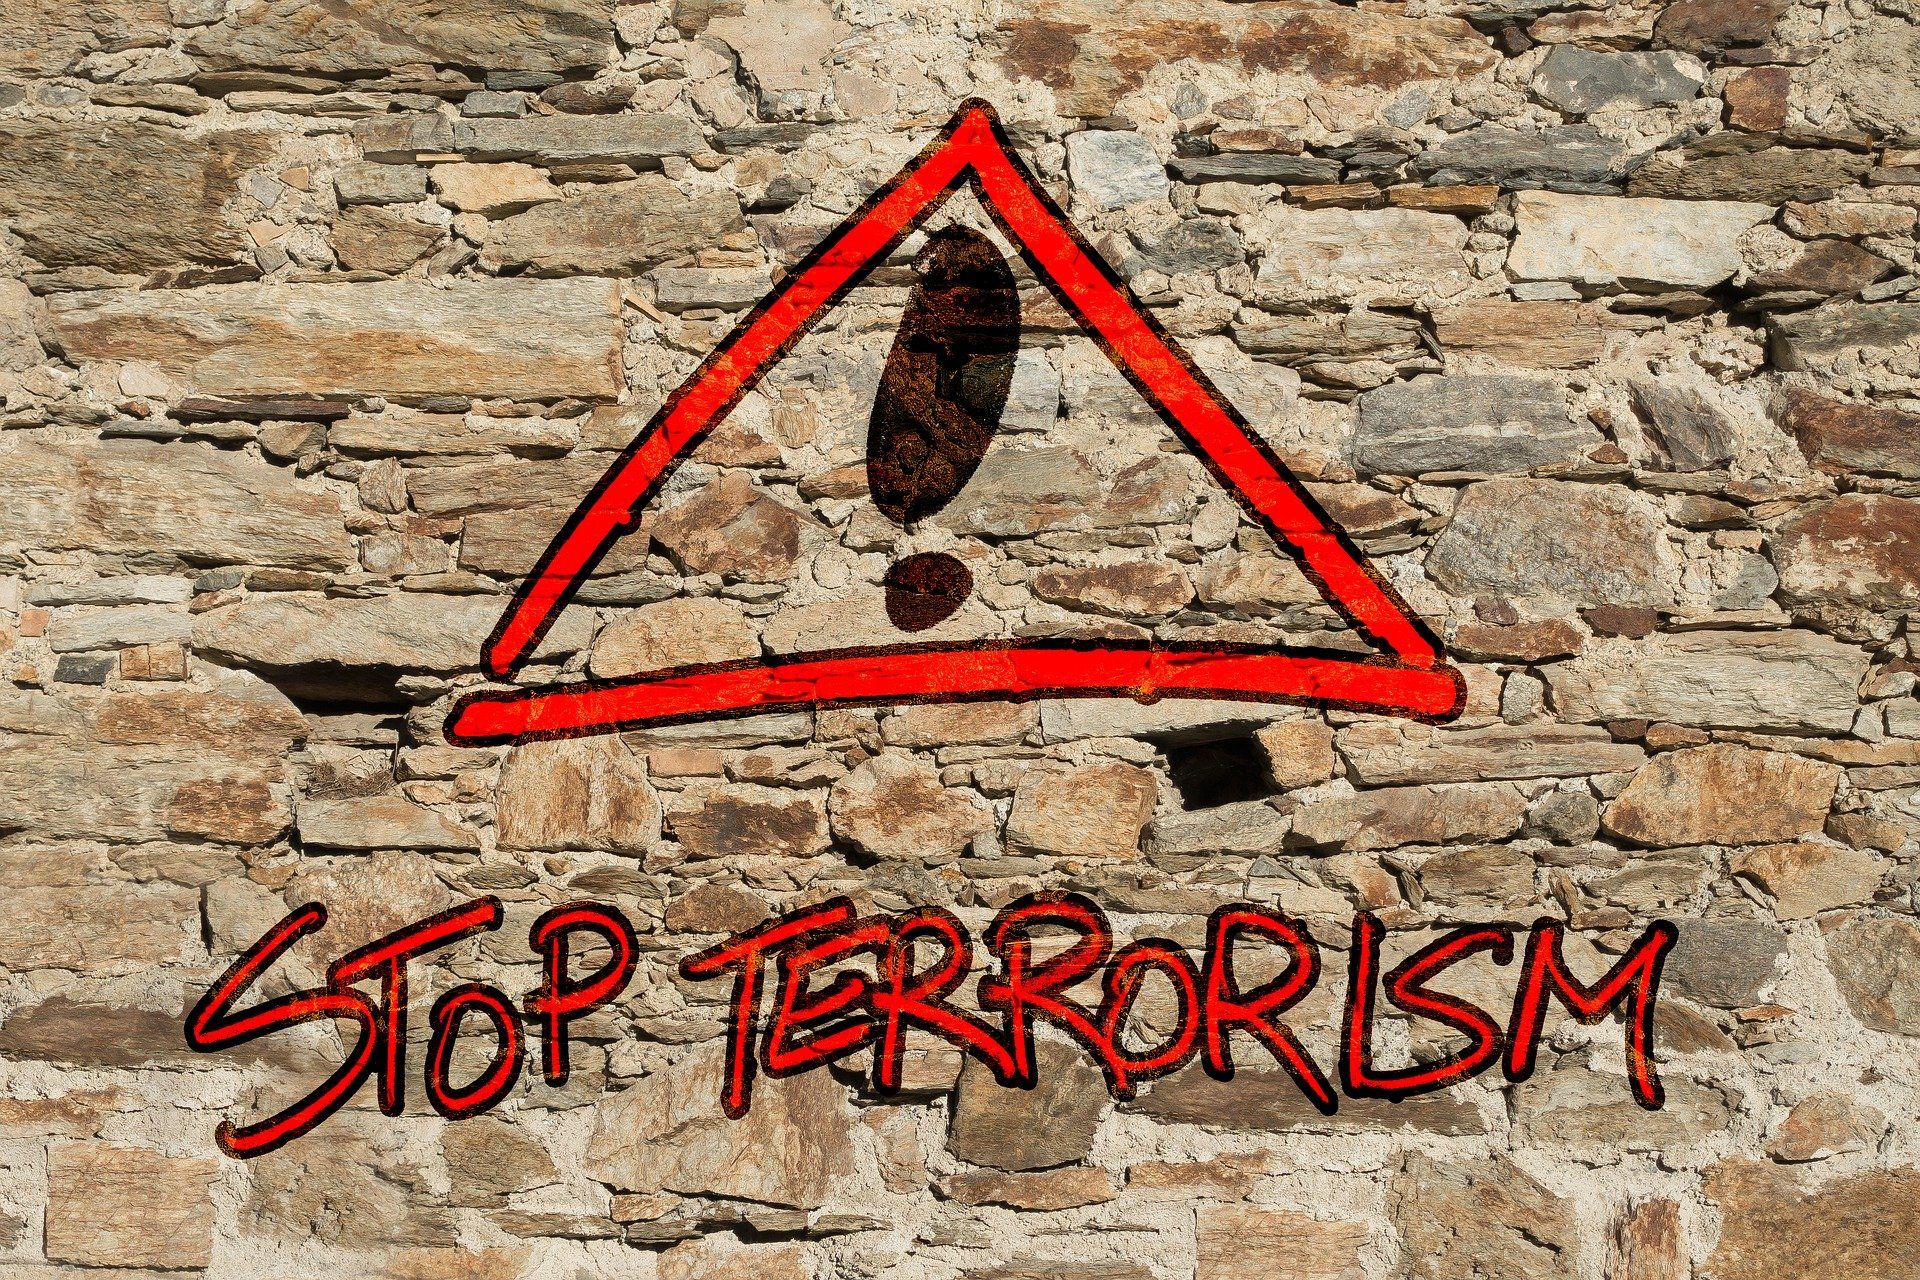 US declares nationwide terrorism alert over threat from domestic anti-government extremists